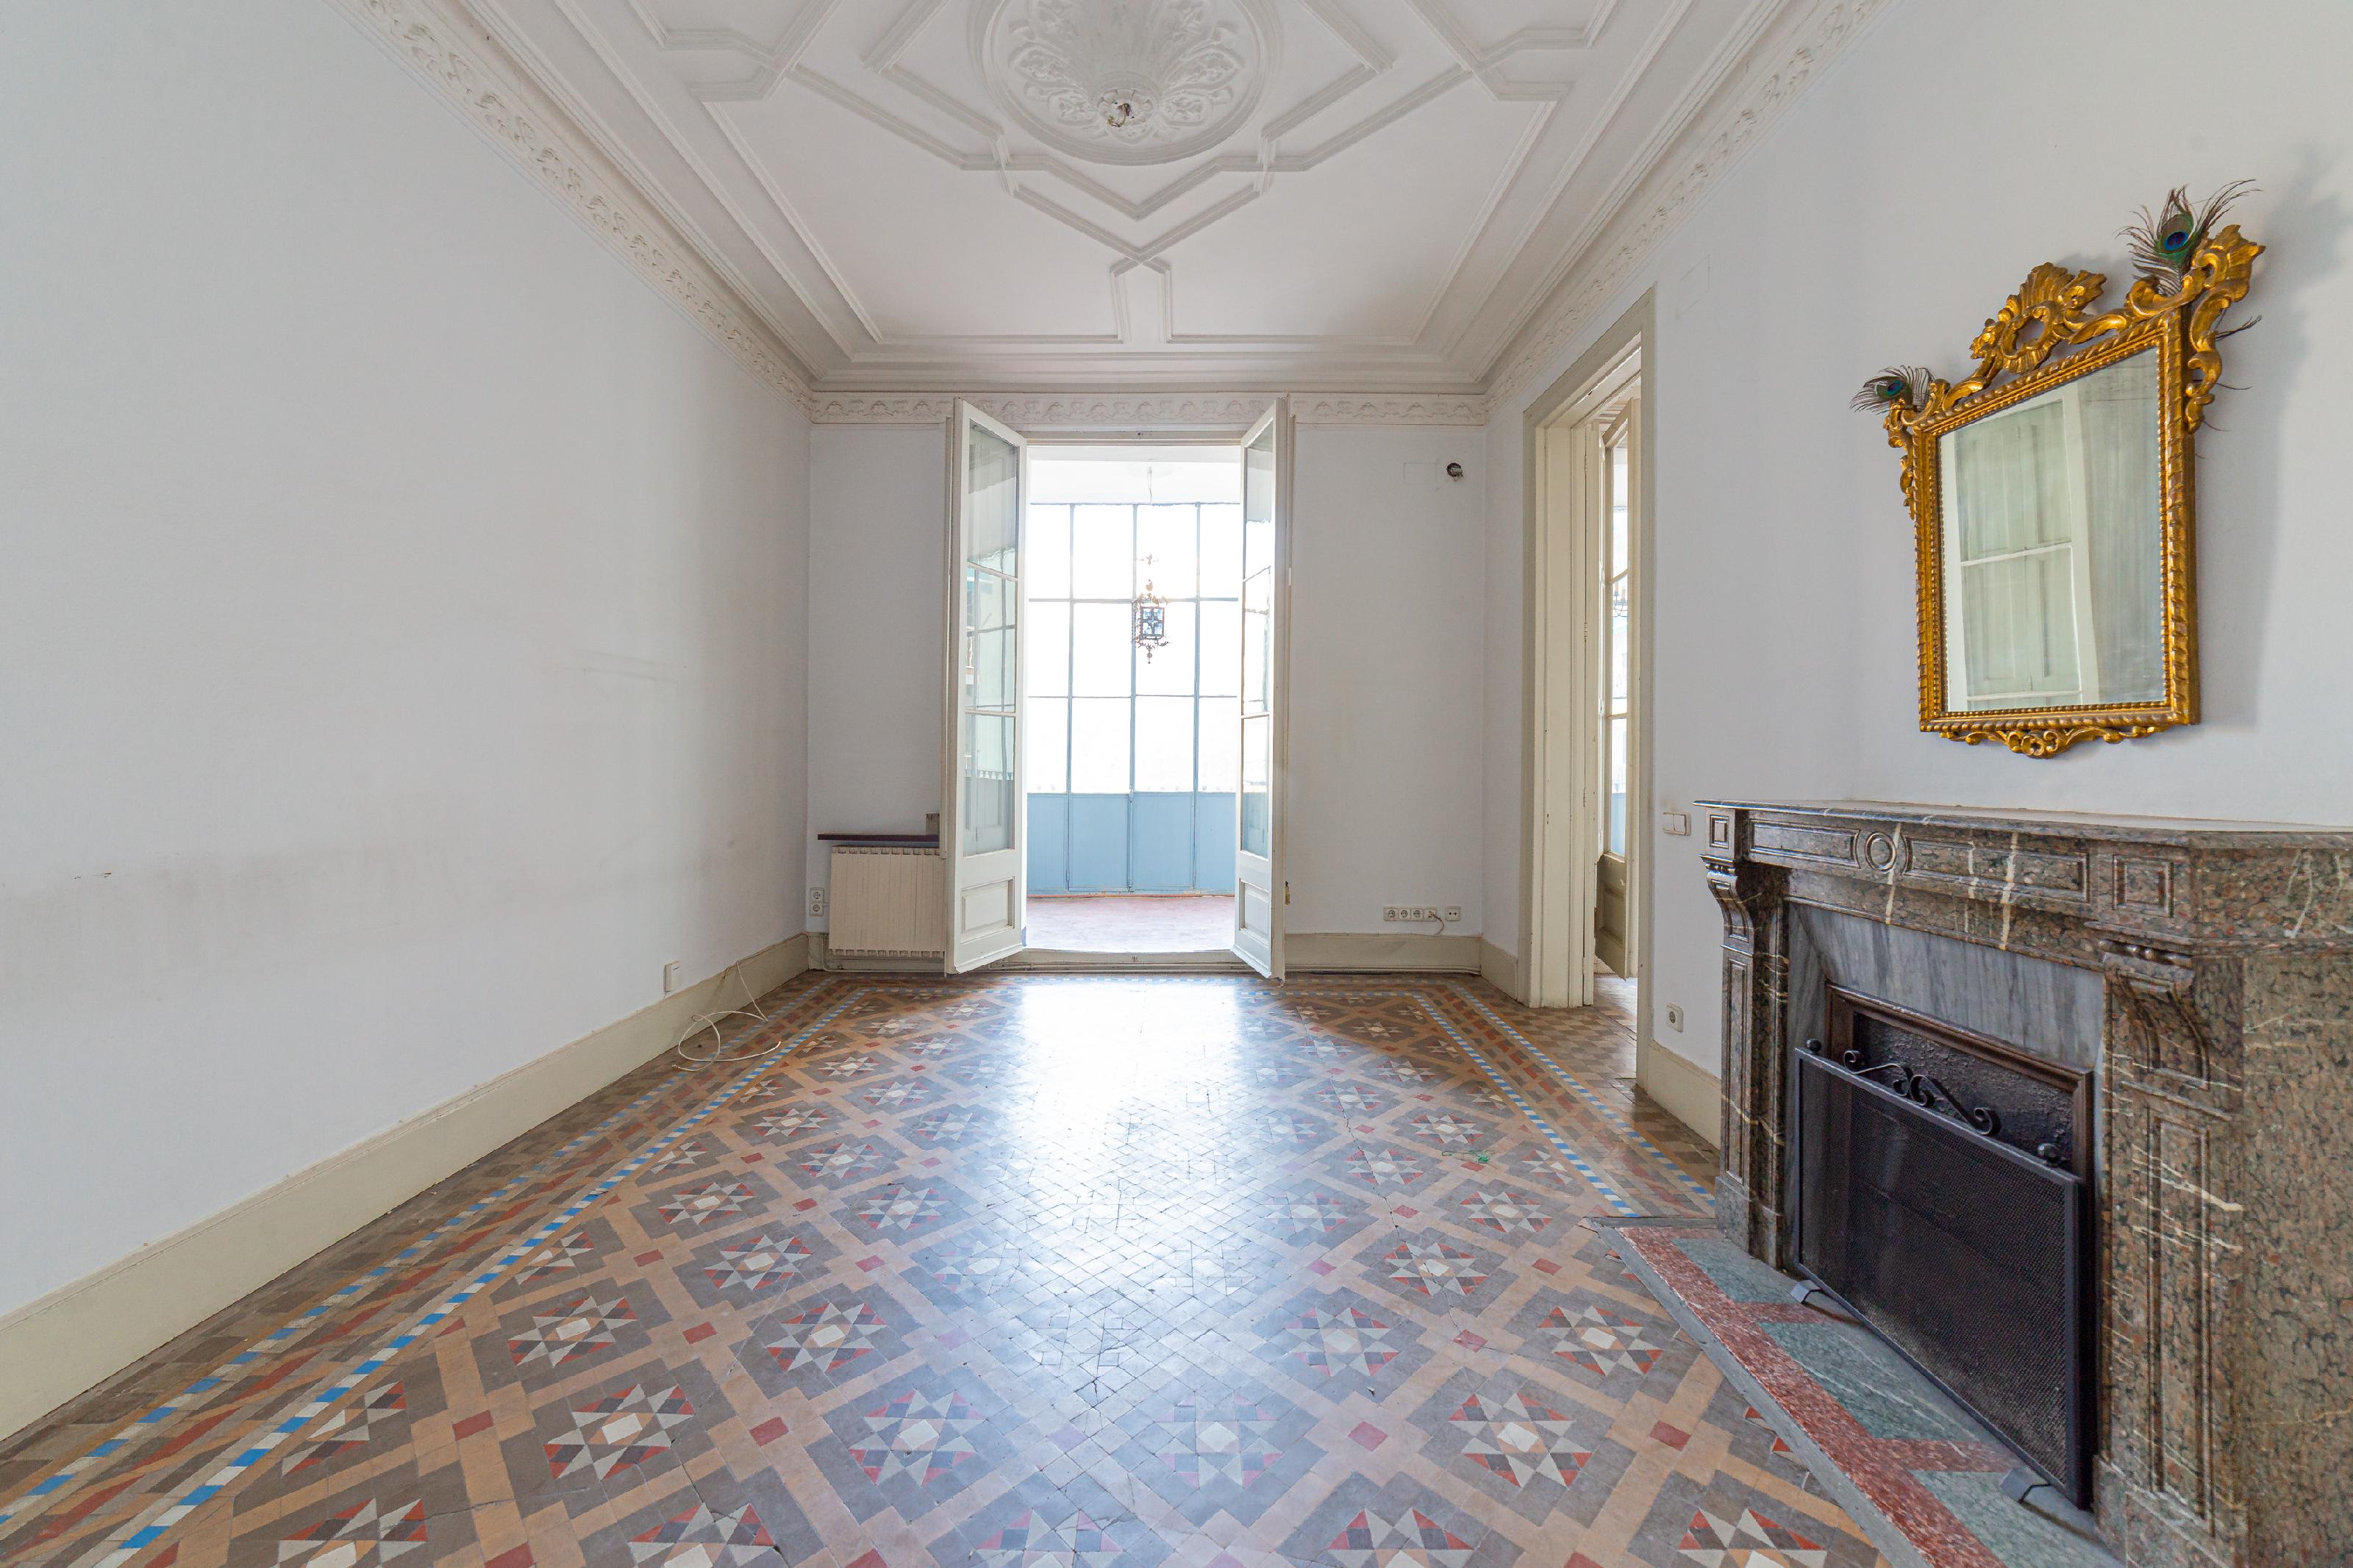 273416 Flat for sale in Eixample, Old Esquerre Eixample 1